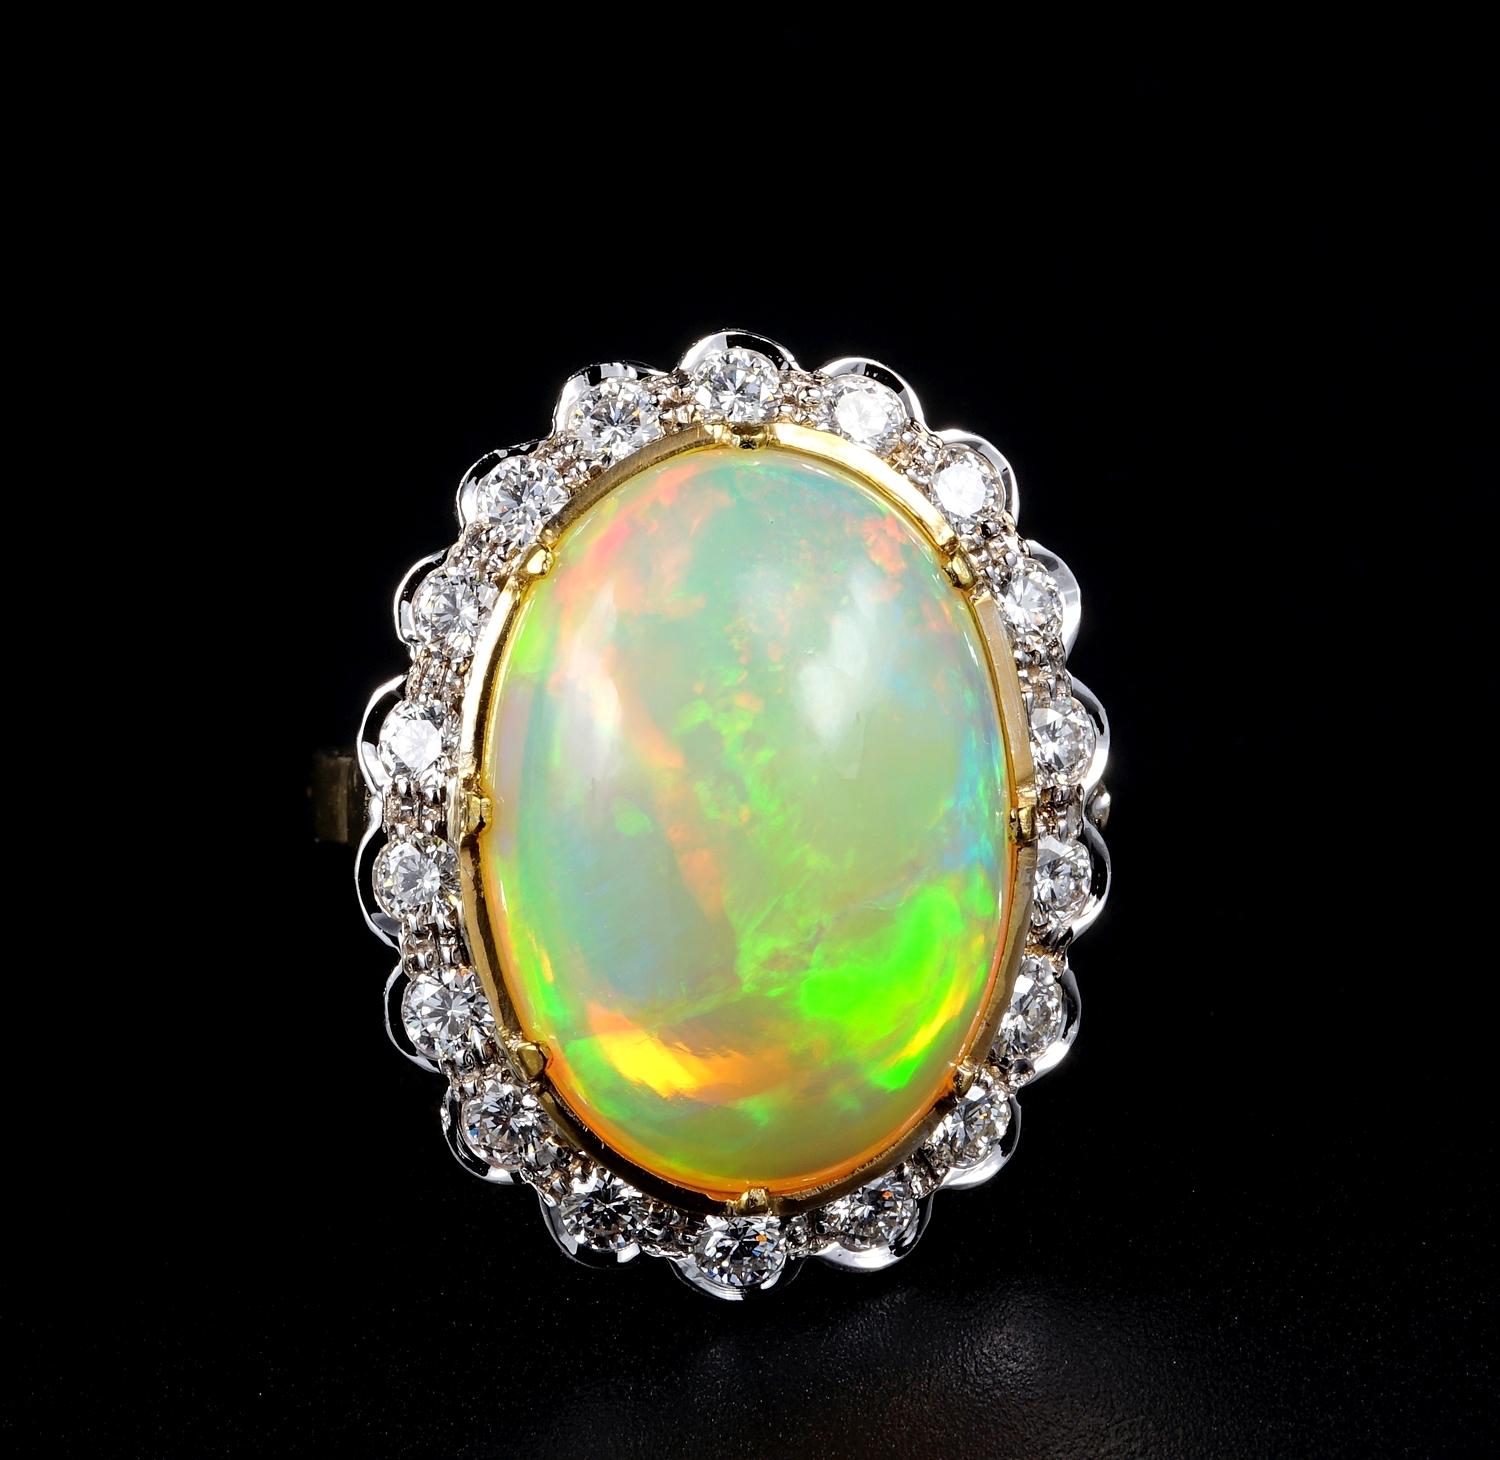 This outstanding Diamond and Opal ring is 1960 ca
Superb hand made mounting made of solid white & yellow 18 Kt gold – designed to exalt the beauty of the main Opal exquisitely complemented by best Diamonds
Italian origin
A stunning, magic 11.50 Ct.